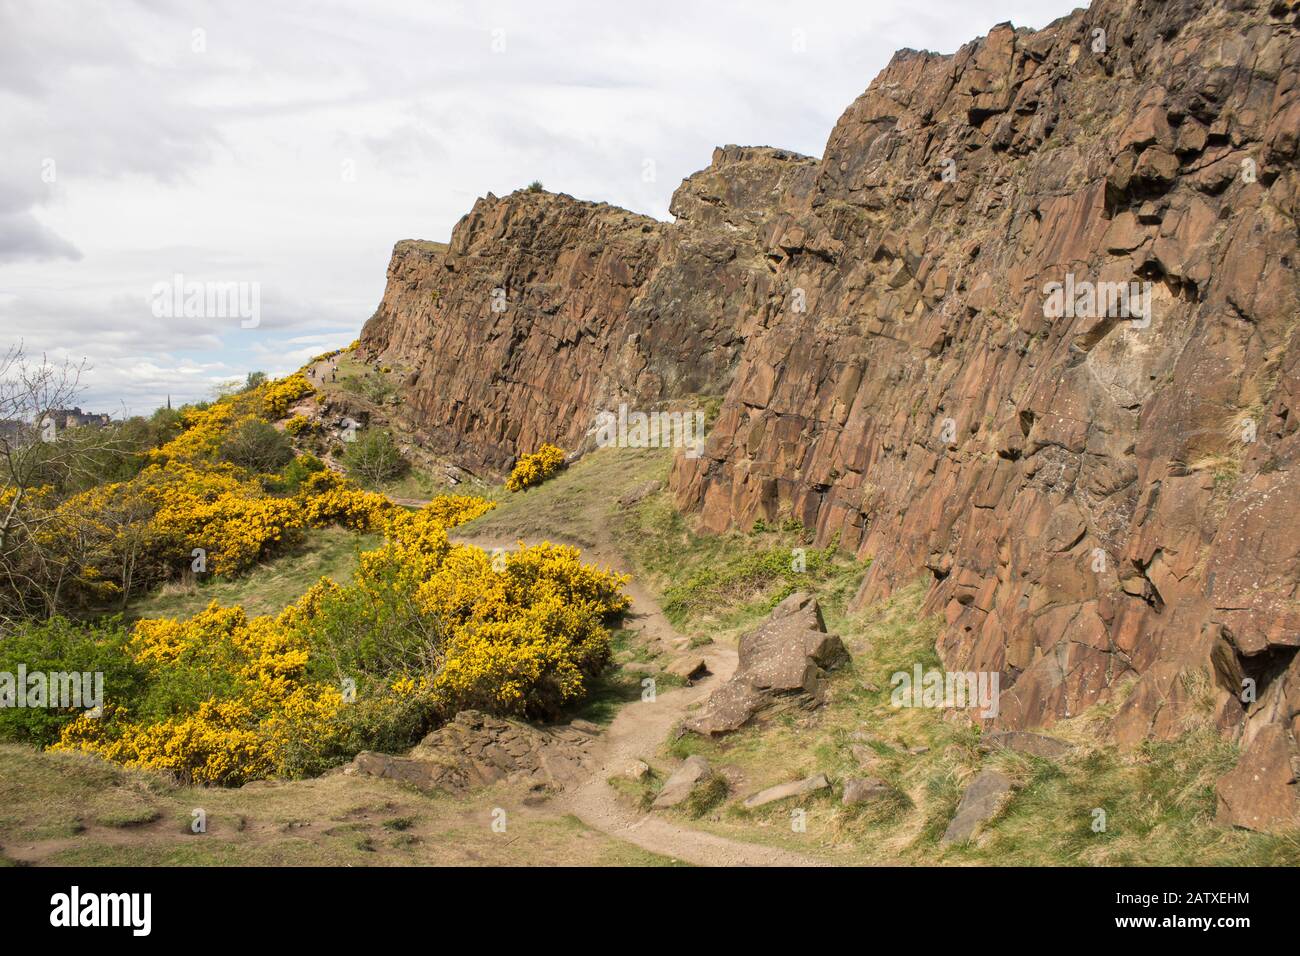 A trail following along the base of the cliffs of the Salisbury Crags with gorse in full bloom on the other side, in Holyrood Park, Edinburgh Stock Photo